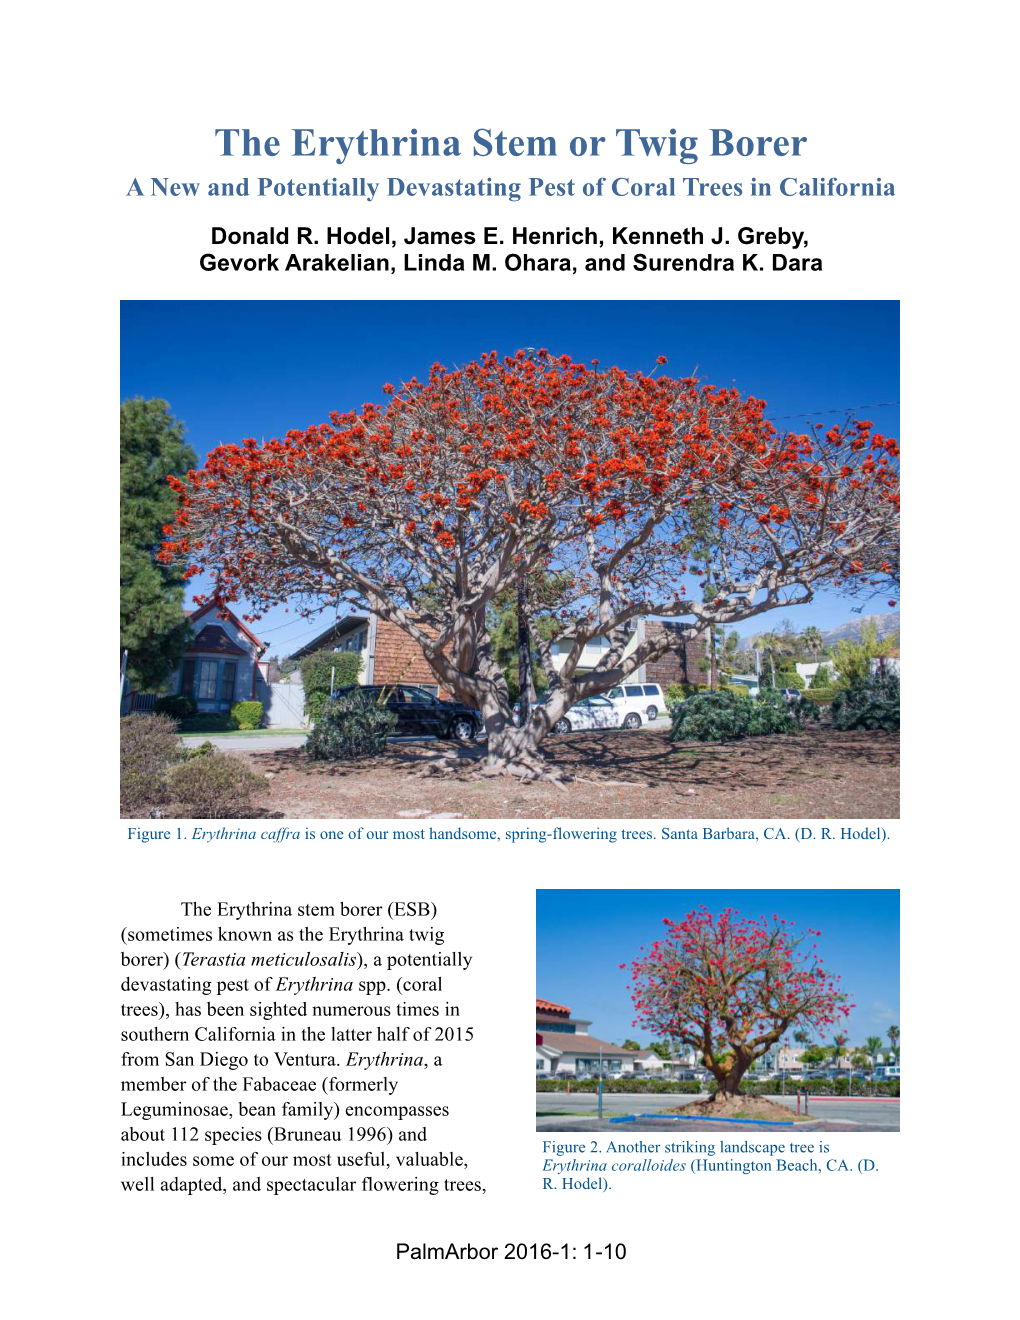 The Erythrina Stem Or Twig Borer a New and Potentially Devastating Pest of Coral Trees in California